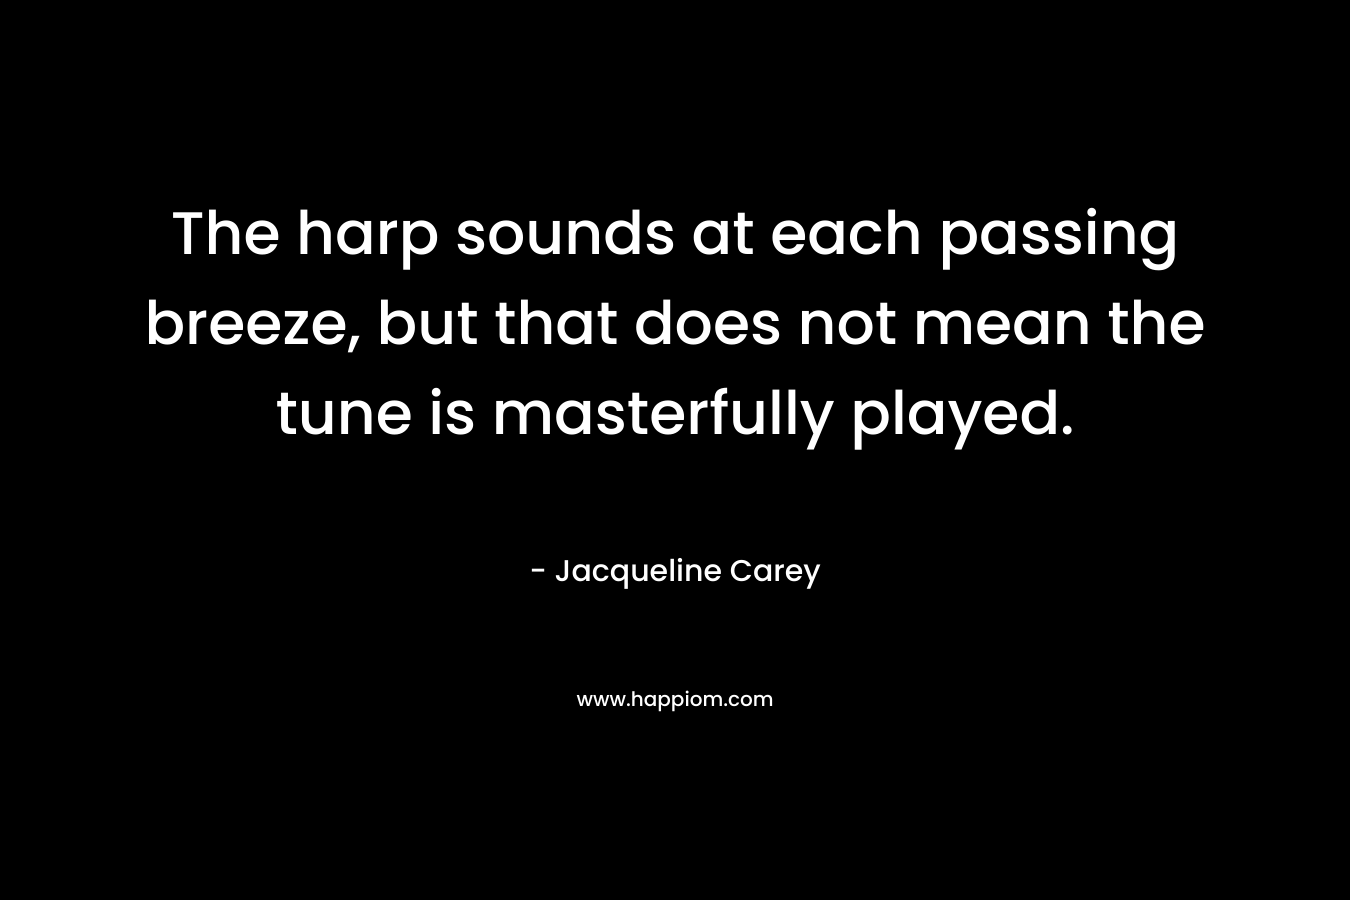 The harp sounds at each passing breeze, but that does not mean the tune is masterfully played.